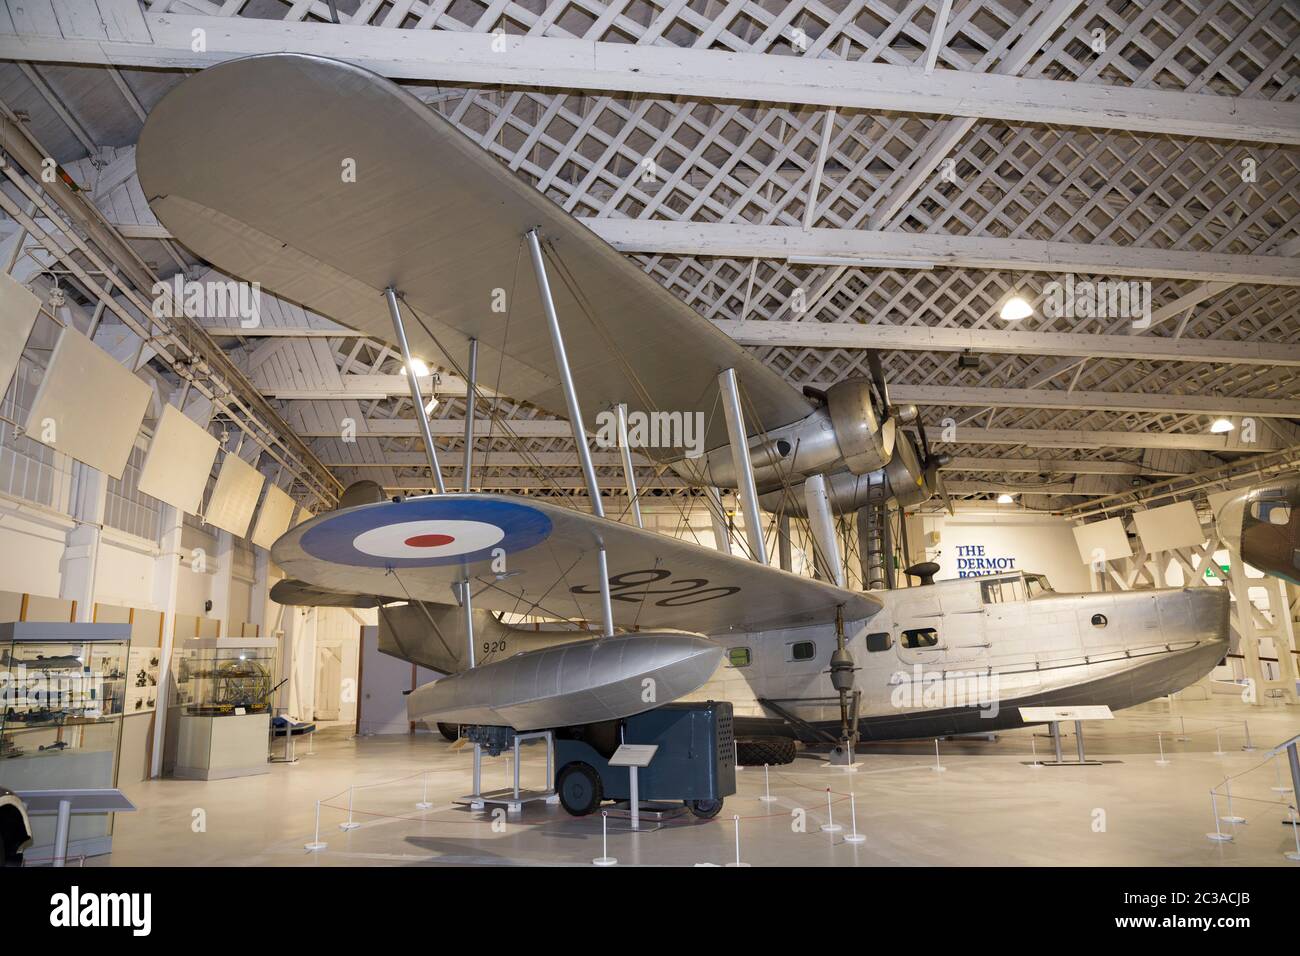 Supermarine Stranraer general reconnaissance aircraft, the final development of the Southampton flying boat. Example from period of the Second world war, WW II aircraft on show at RAF Royal air force Museum Hendon, London UK (117) Stock Photo